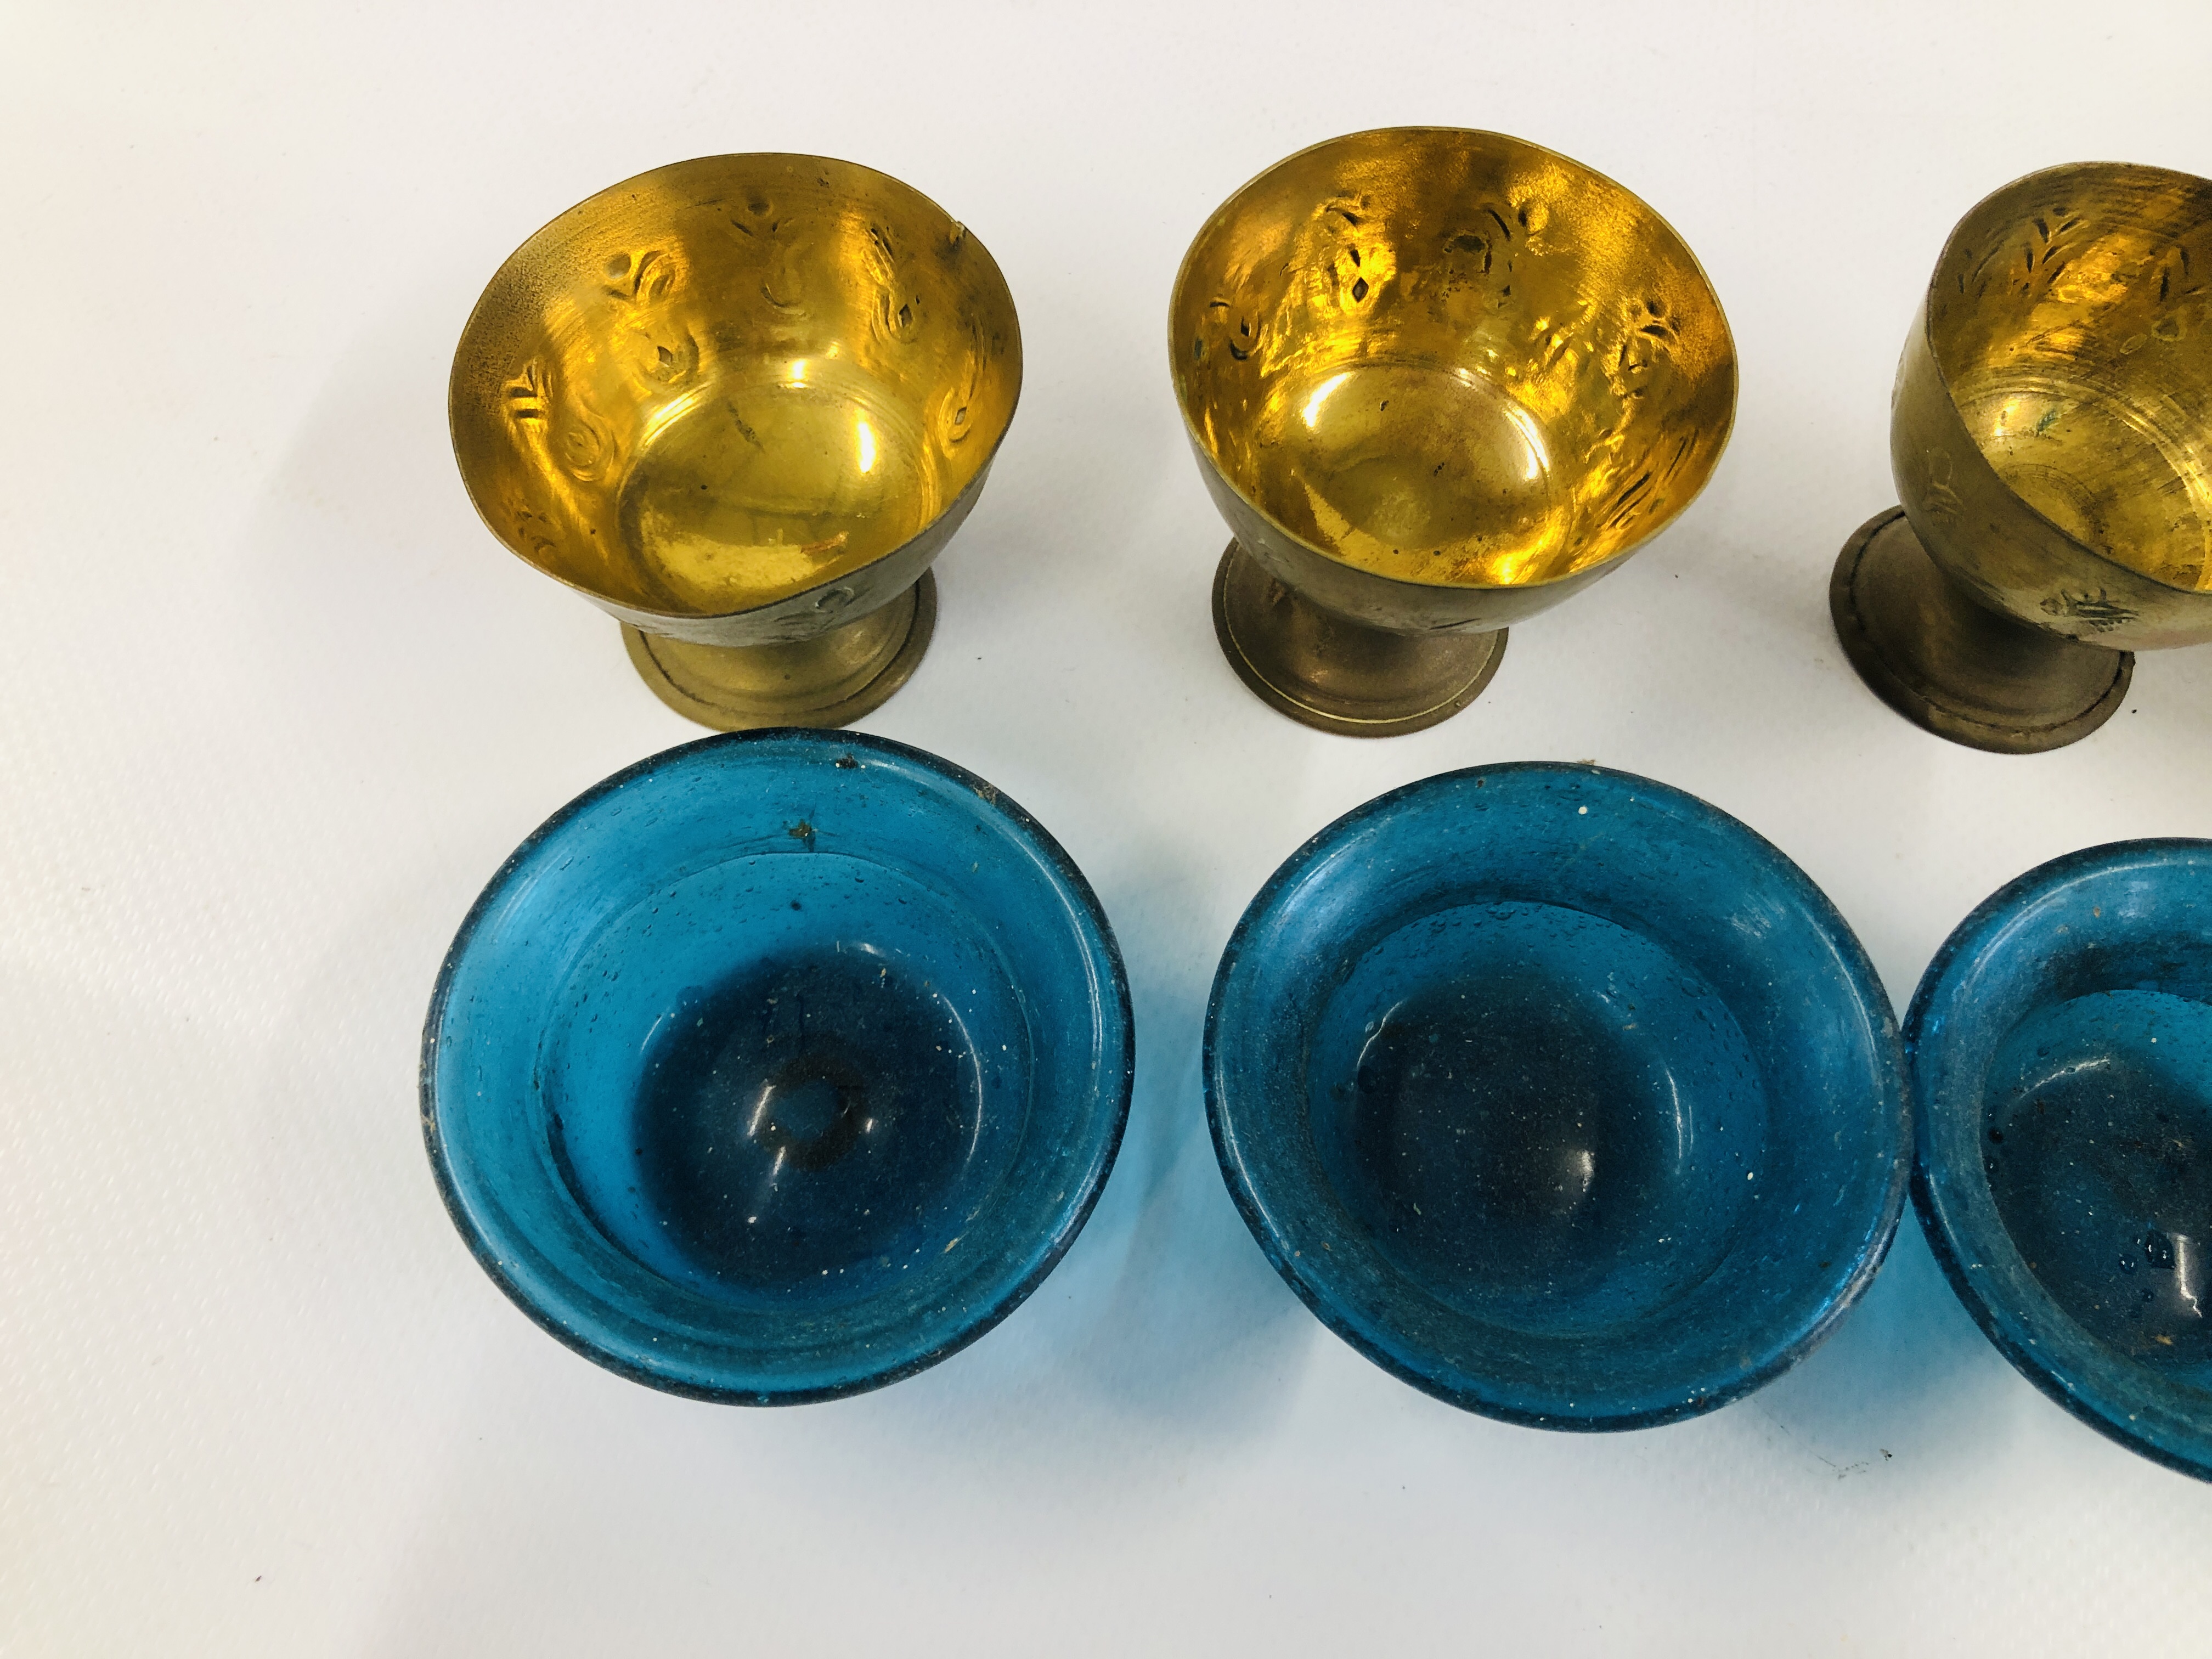 A SET OF SIX MIDDLE EASTERN BRASS GOBLET VESSELS WITH BLUE GLASS LINERS. - Image 8 of 11